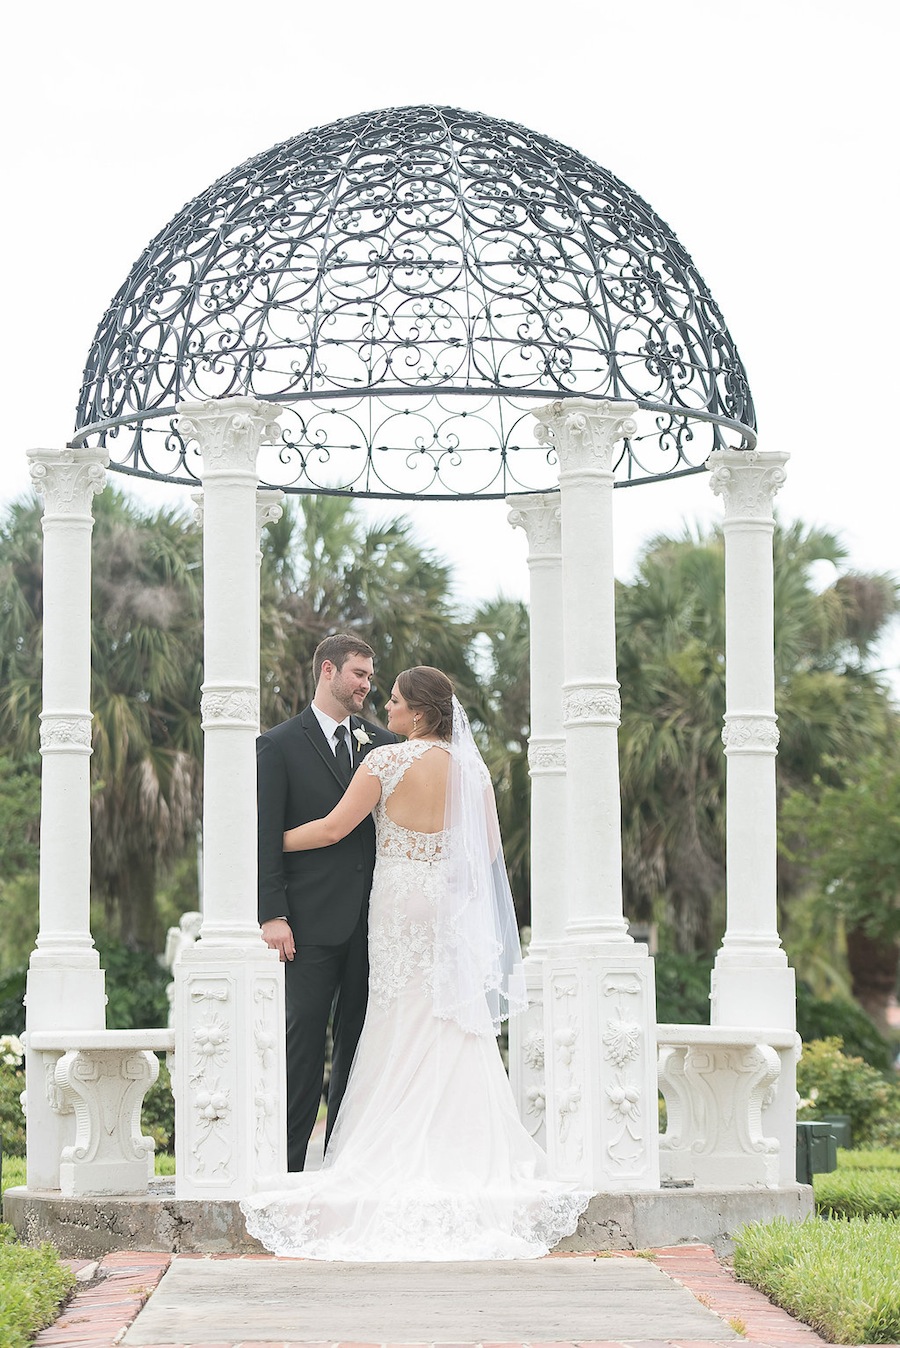 Downtown St. Pete Bride and Groom Wedding Photos | Kristen Marie Photography